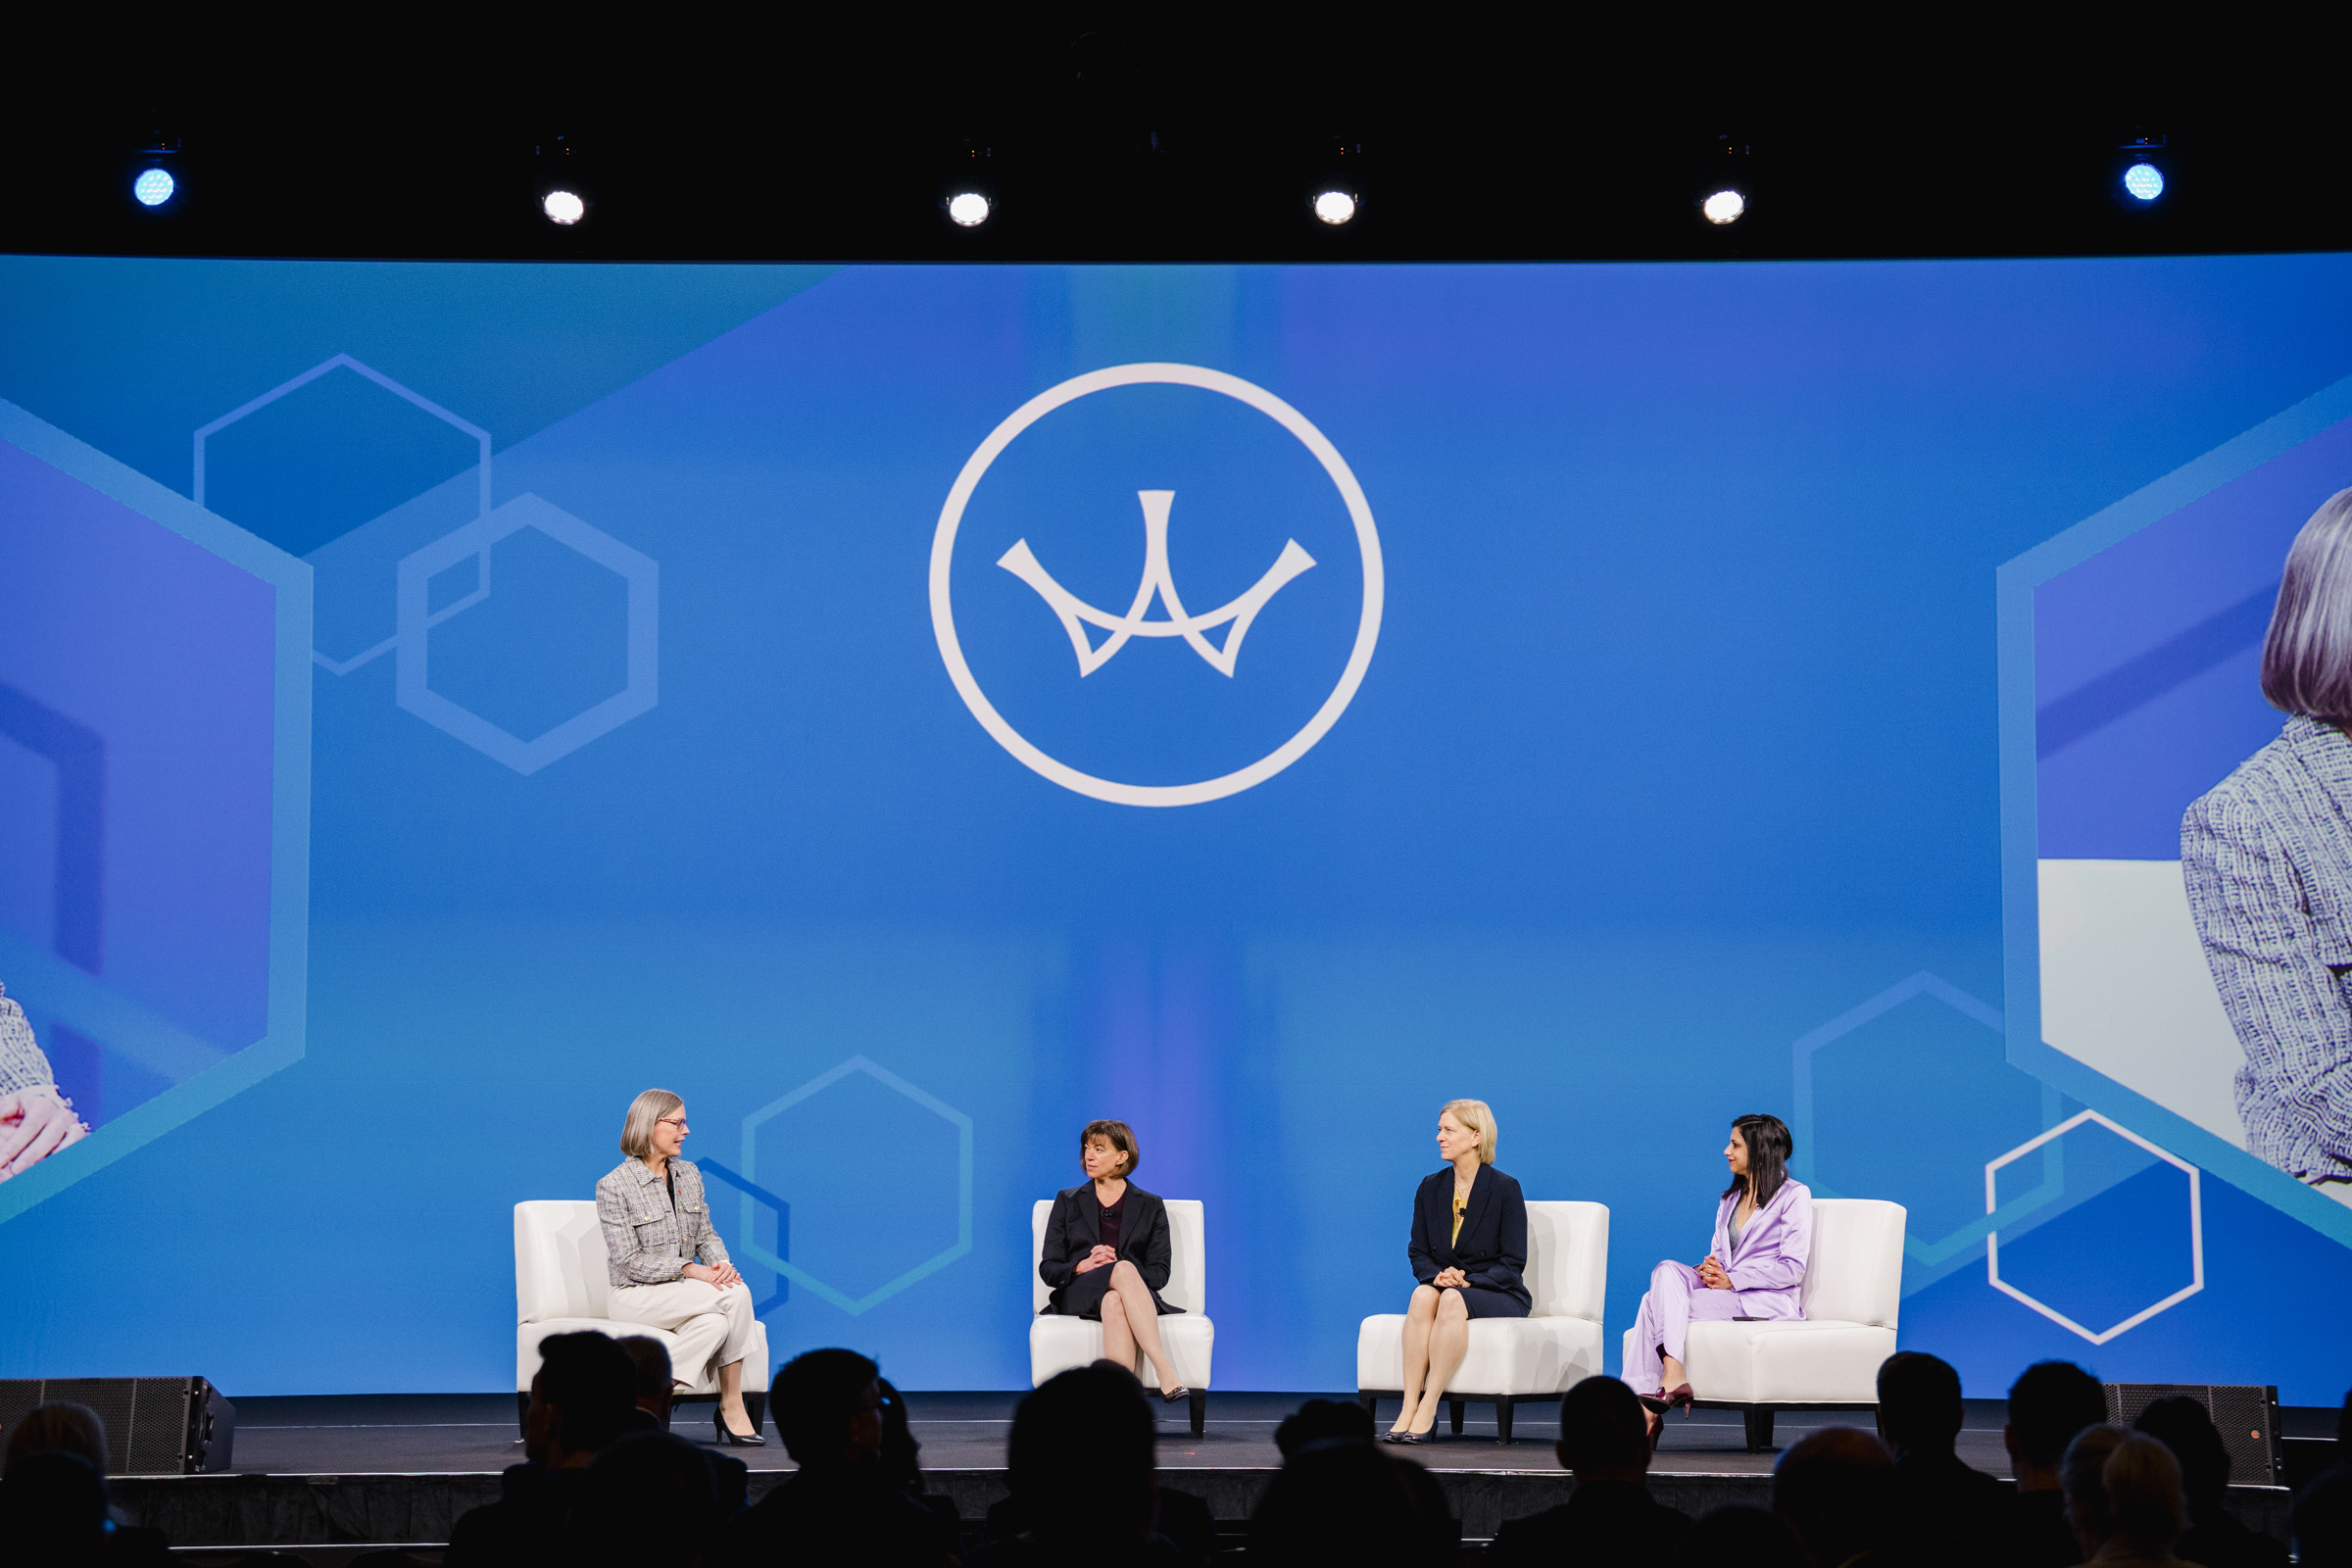 Four individuals are seated on stage, participating in a panel discussion. The background features a large logo and geometric shapes on a blue screen. Capturing the moment with event photography, an audience is visible in the foreground.